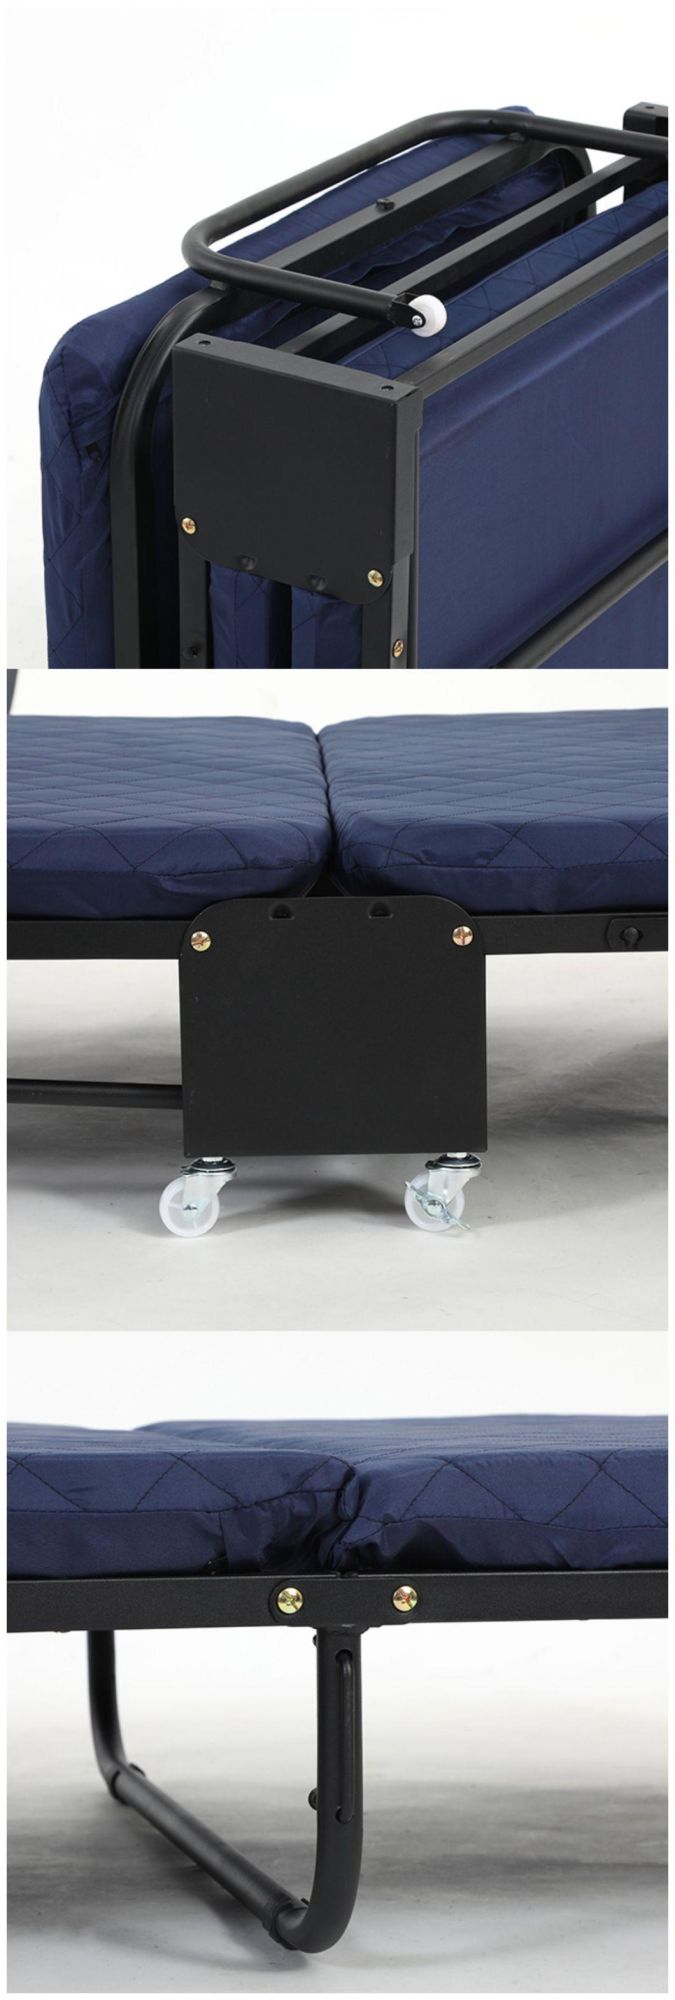 Ultralight Portable Camping Folding Hospital Bed Cot Furniture